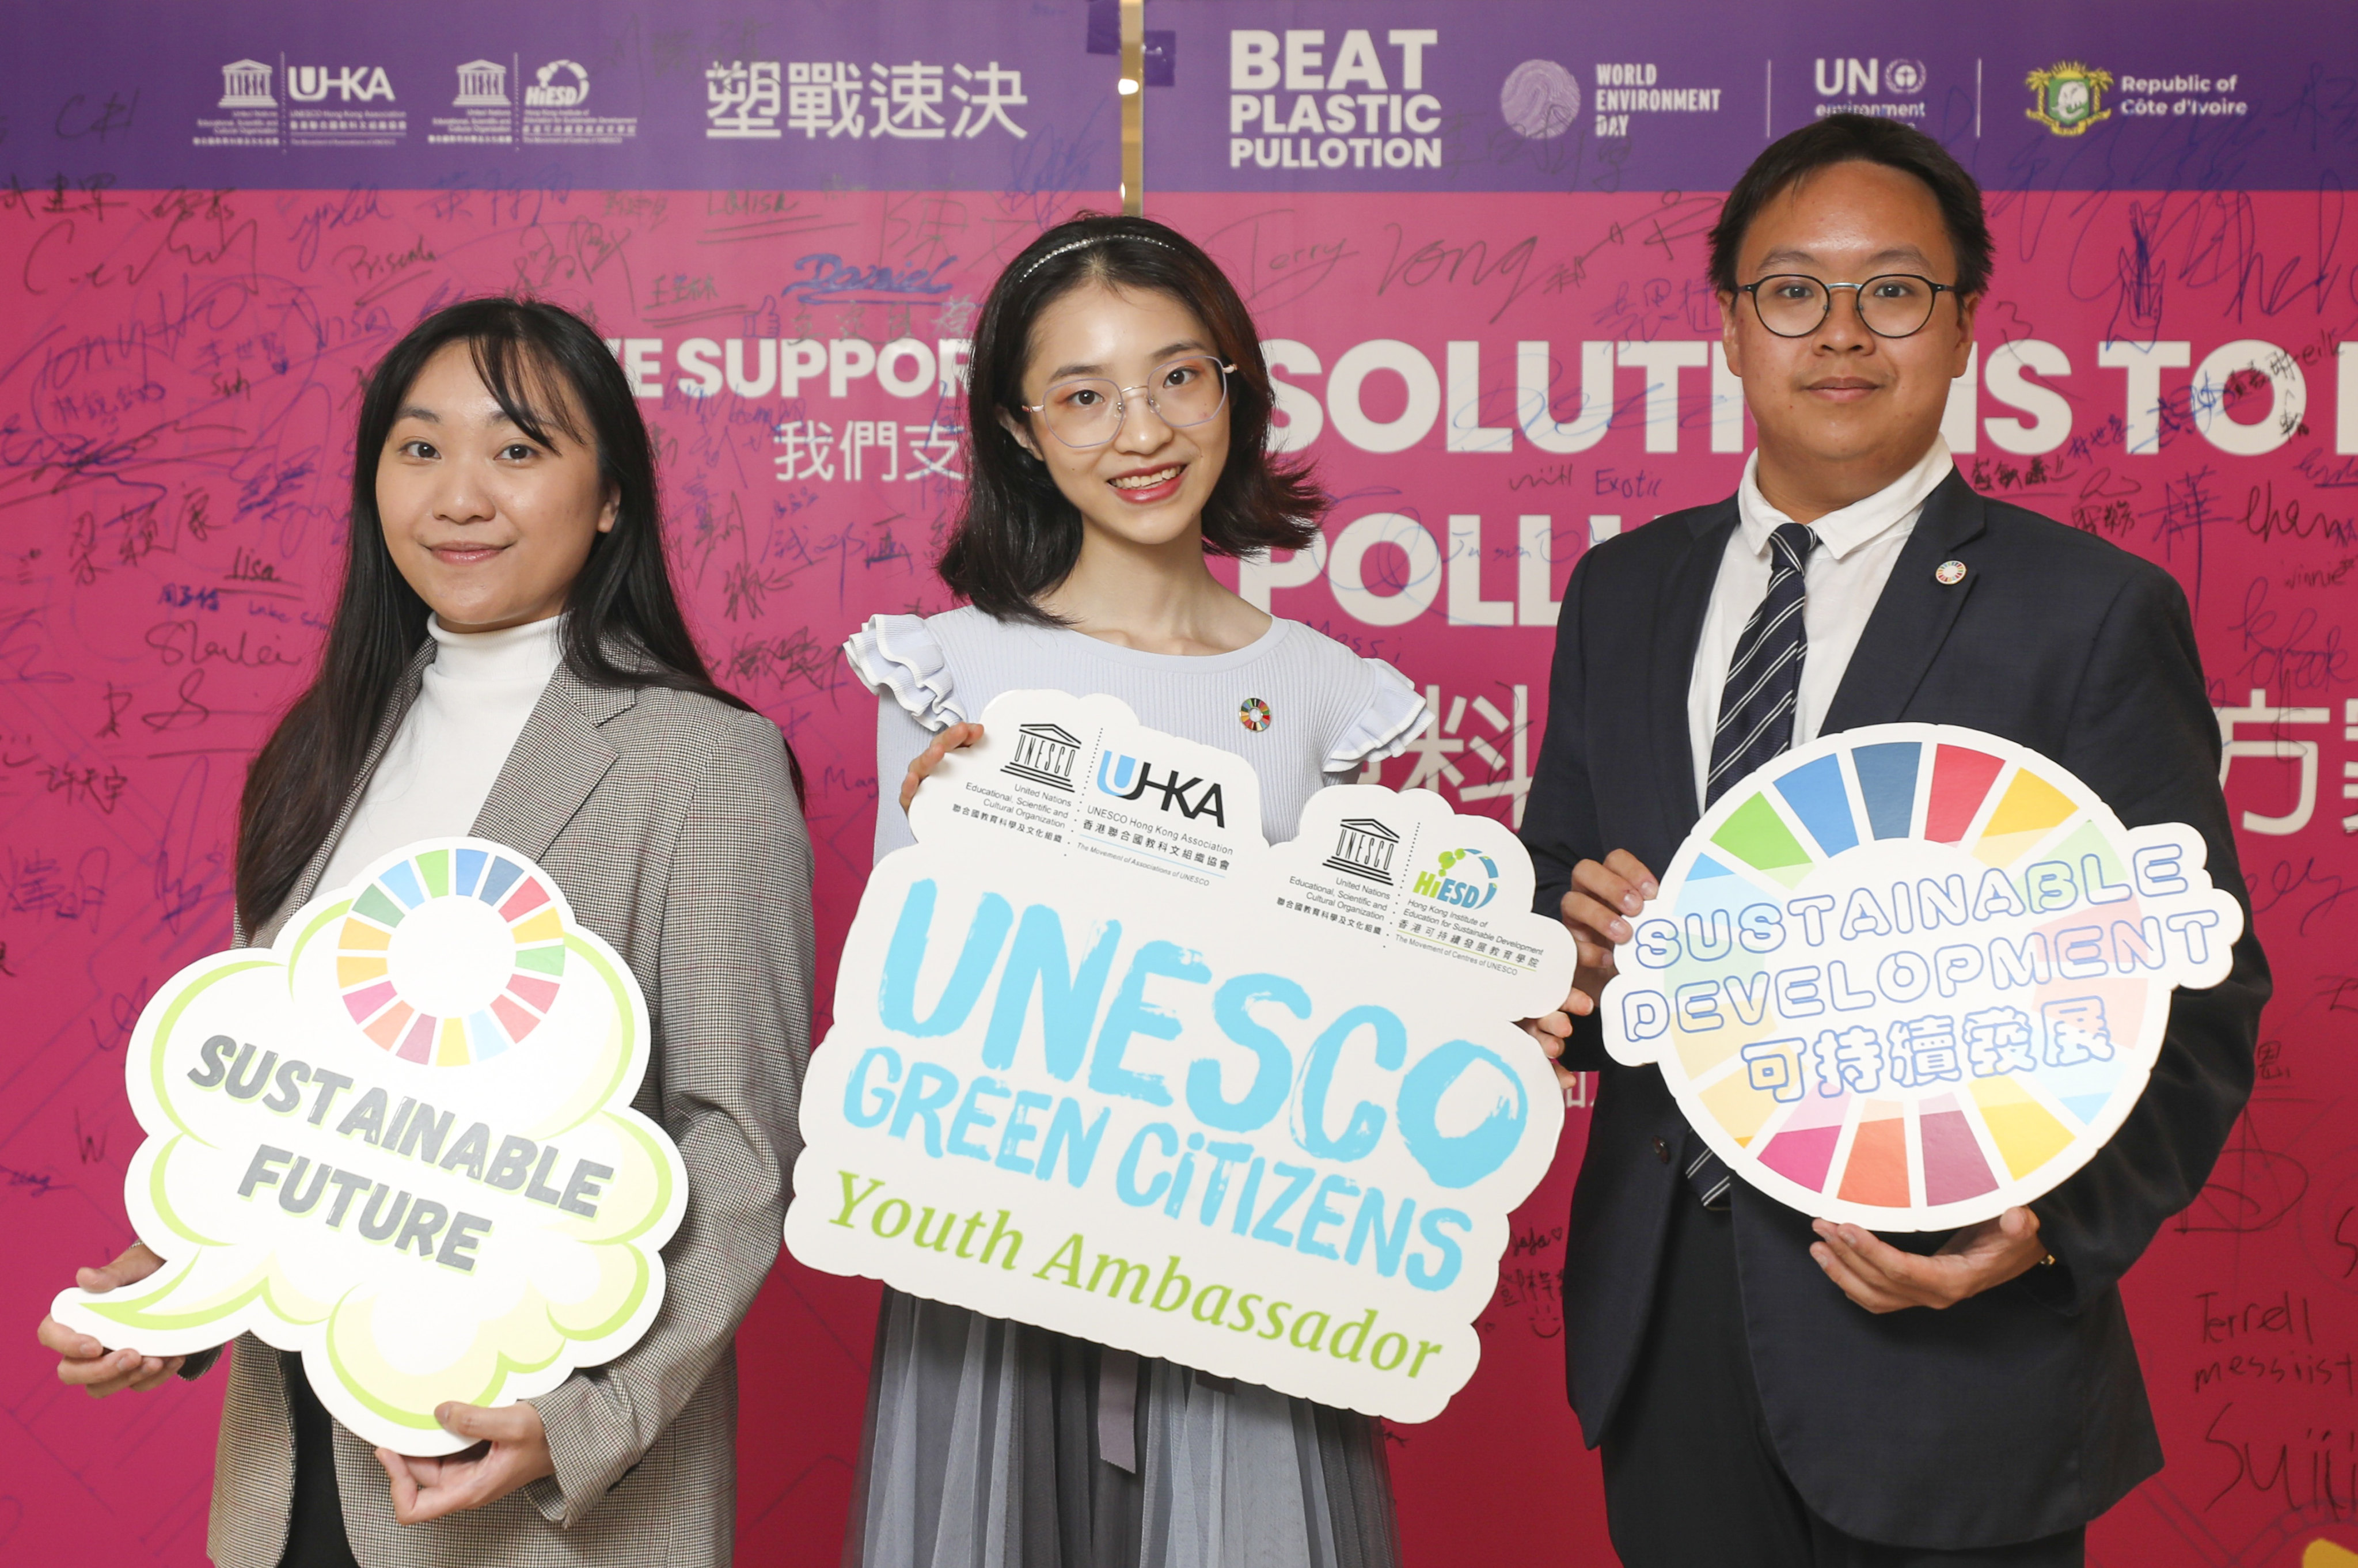 Alisha Kwan (left) and Pagiel He (right) share about their experiences as Green Citizens Youth Ambassadors. Photo: Xiaomei Chen